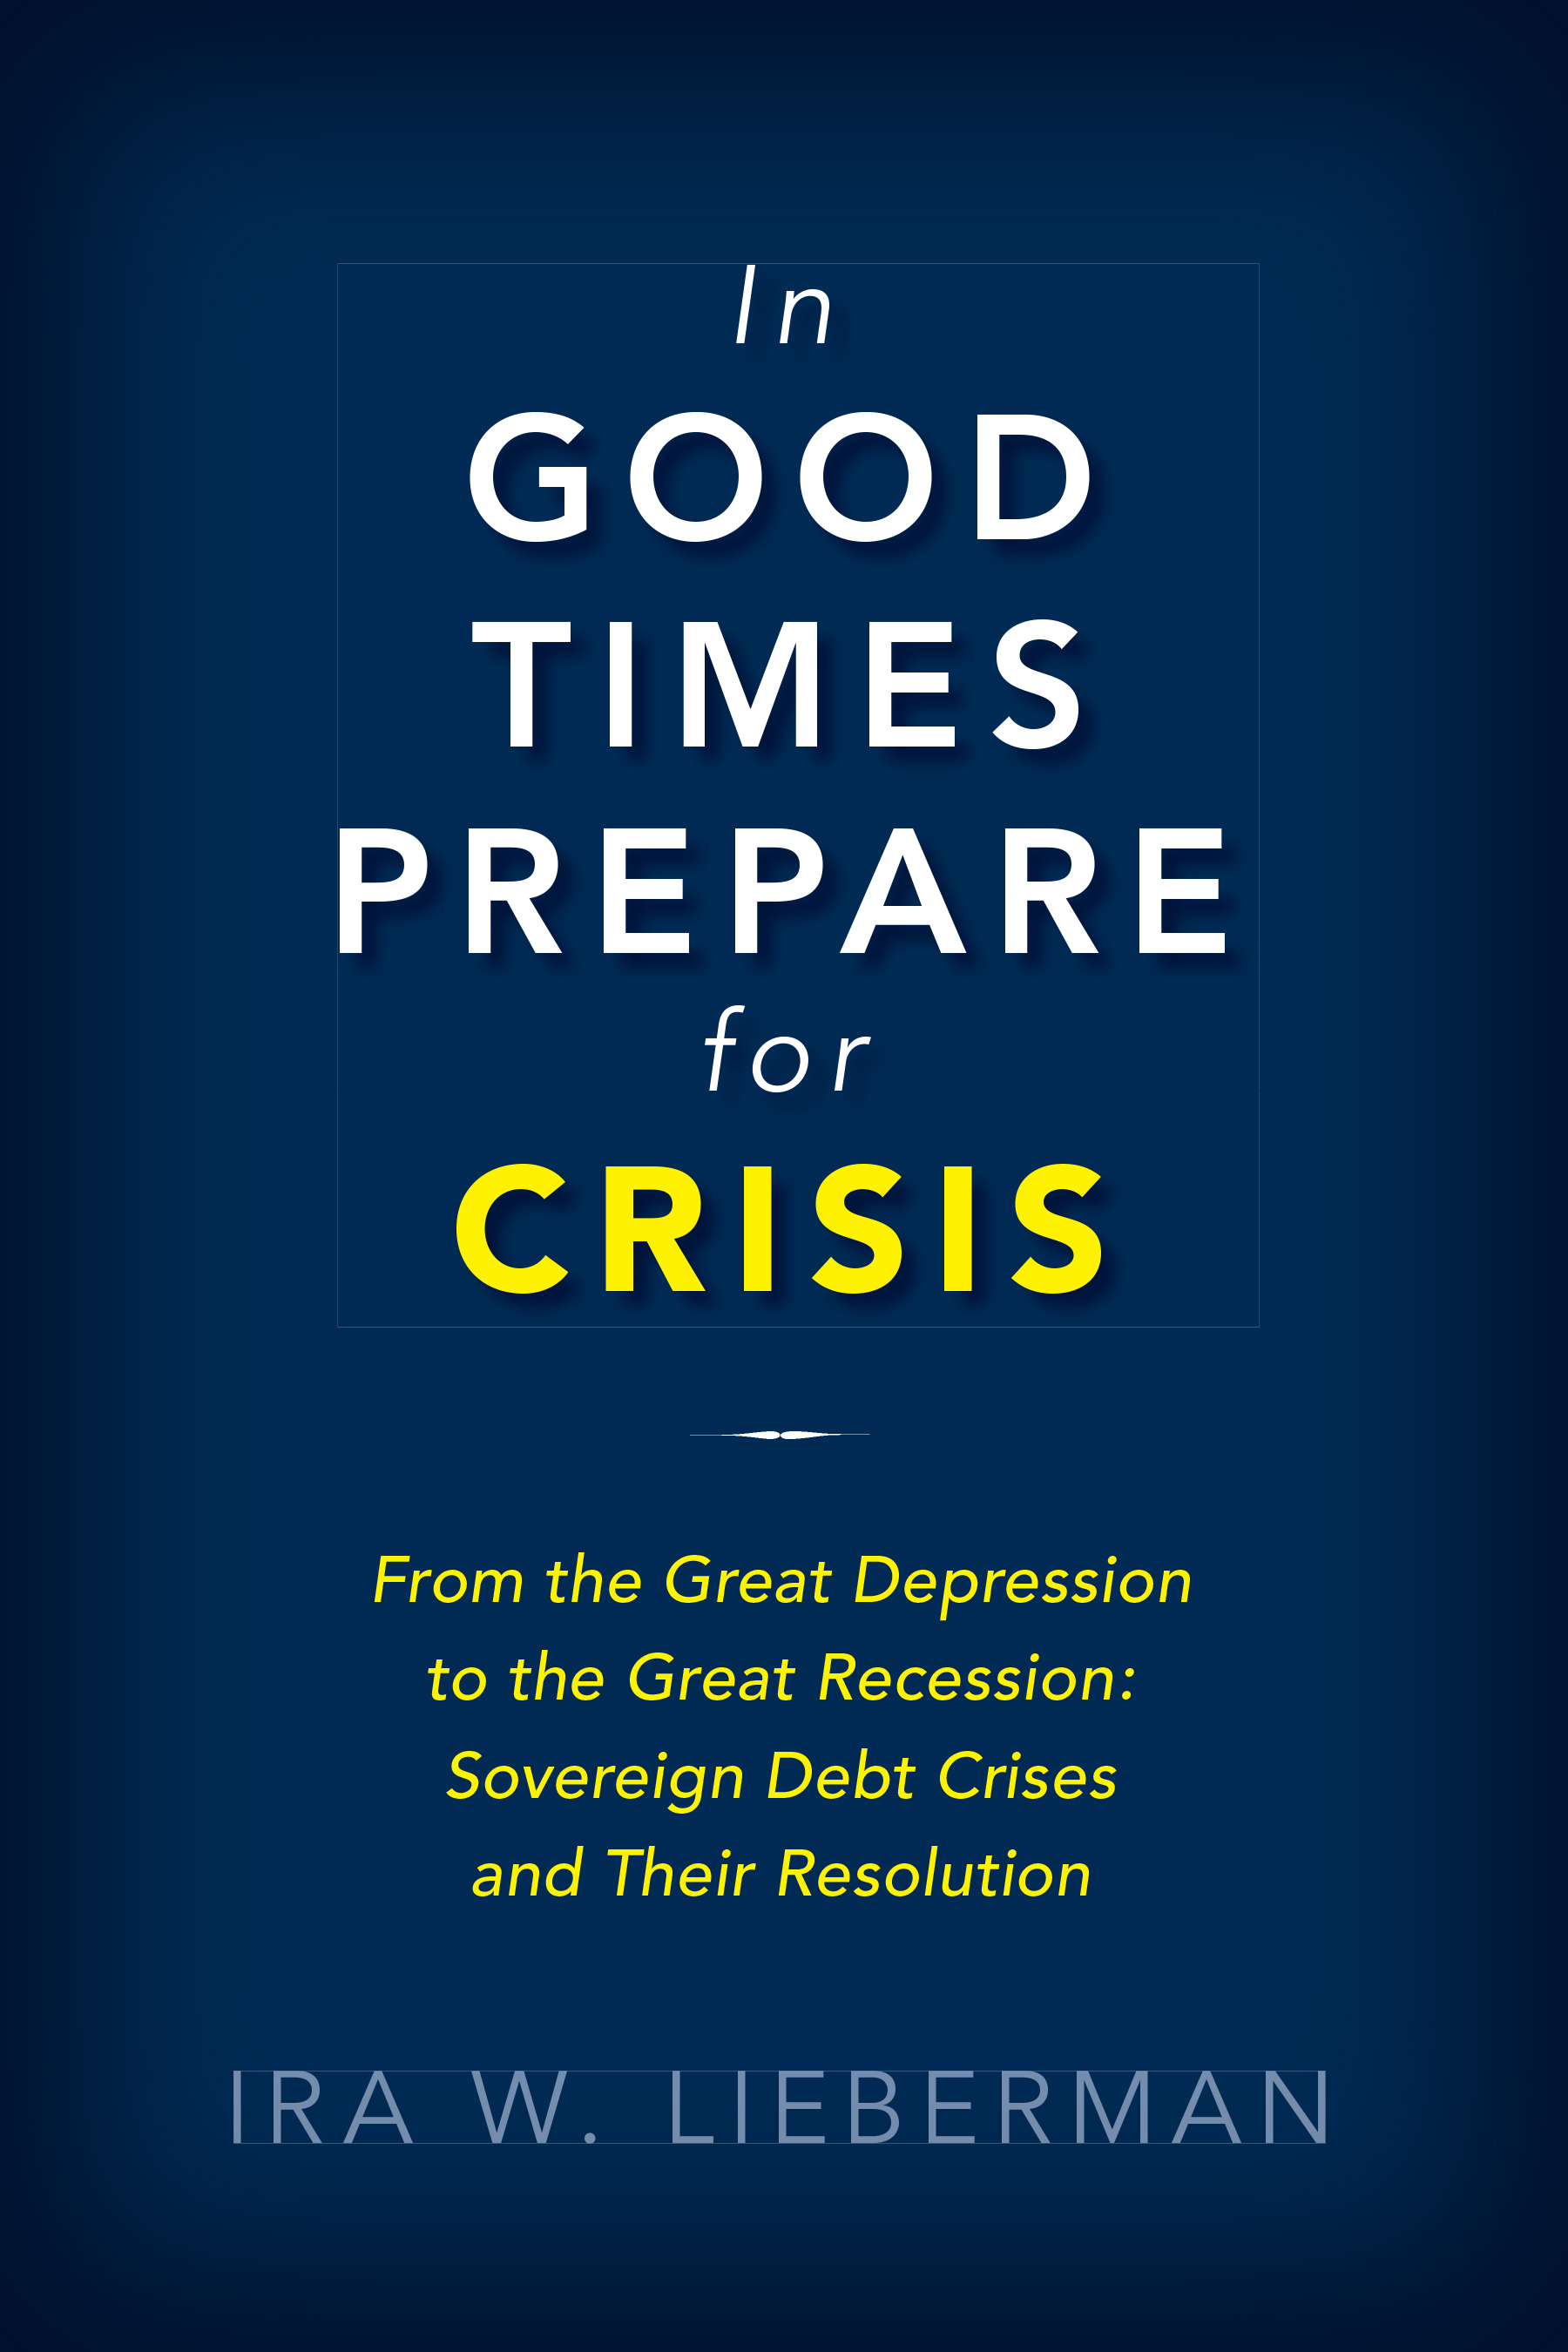 In Good Times Prepare for Crisis: From the Great Depression to the Great Recession: Sovereign Debt Crises and Their Resolution